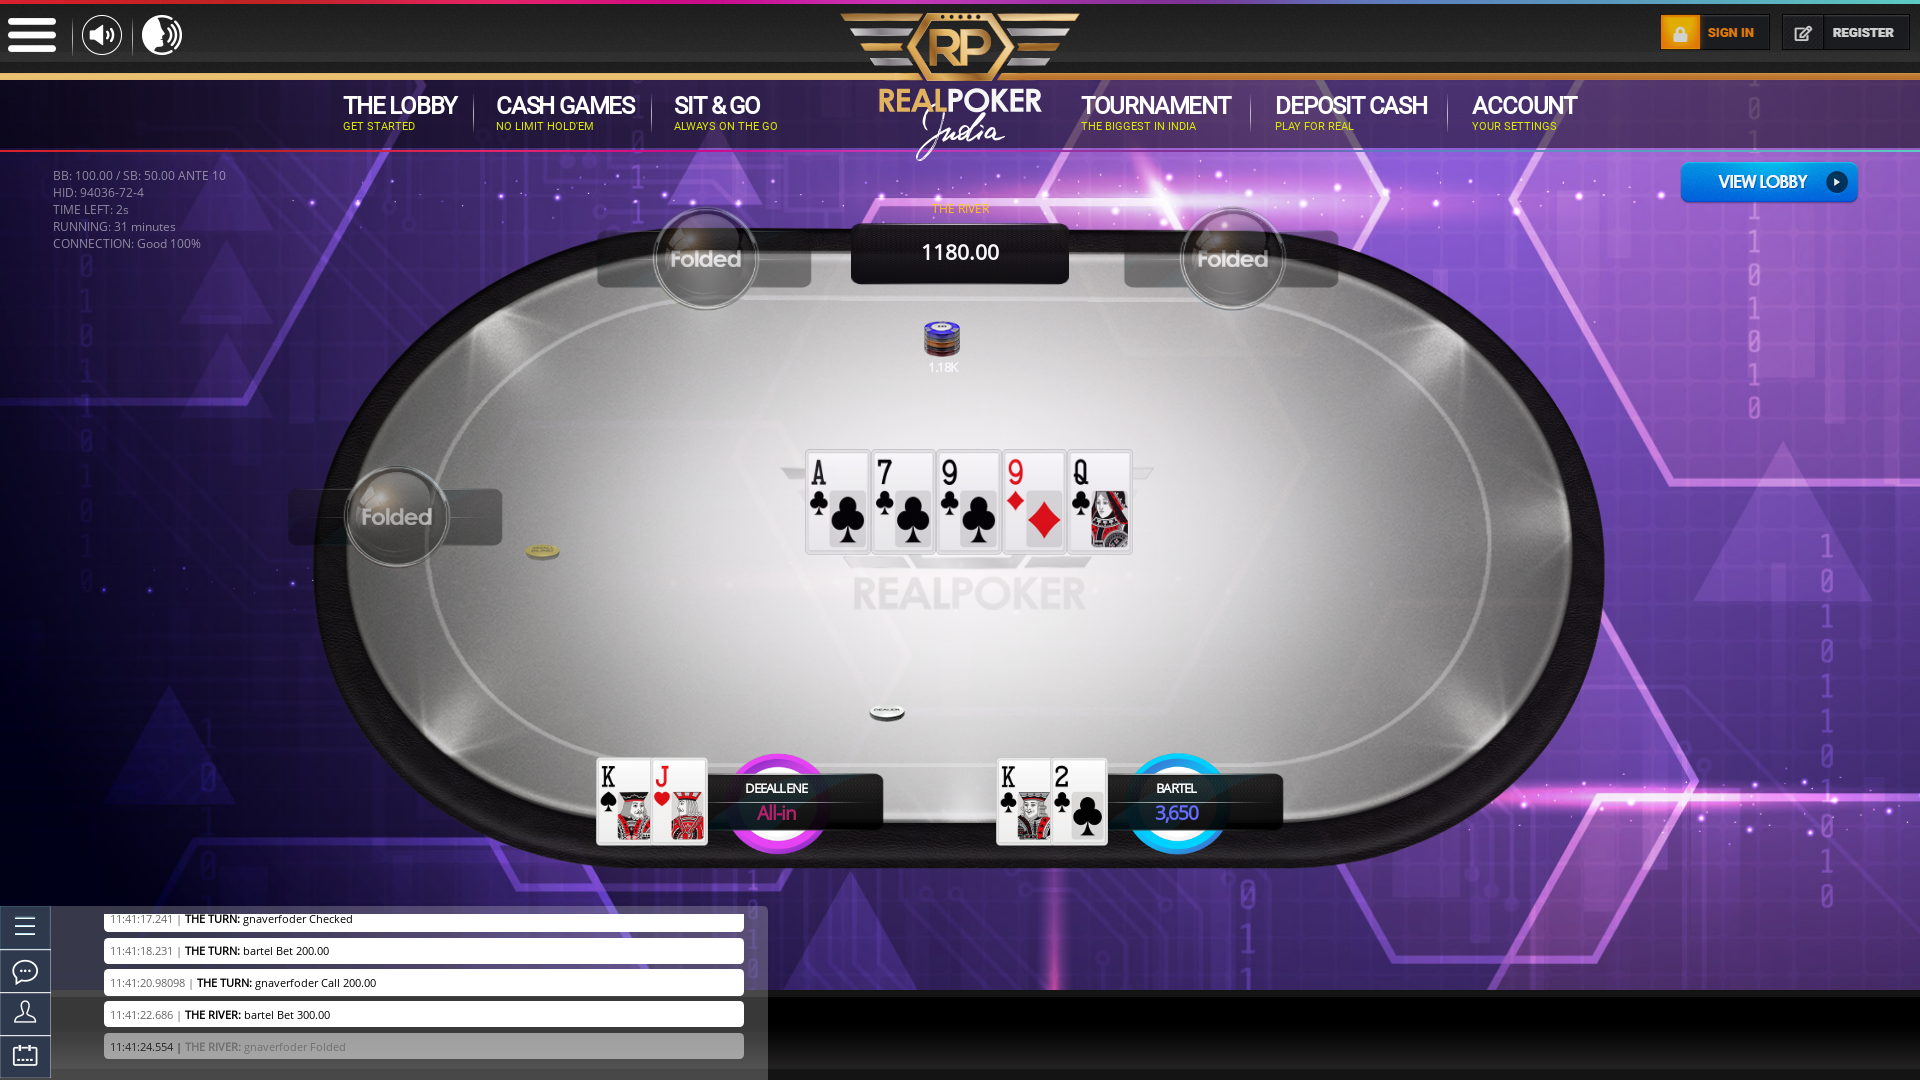 Bardez texas holdem poker table on a 10 player table in the 30th minute of the match